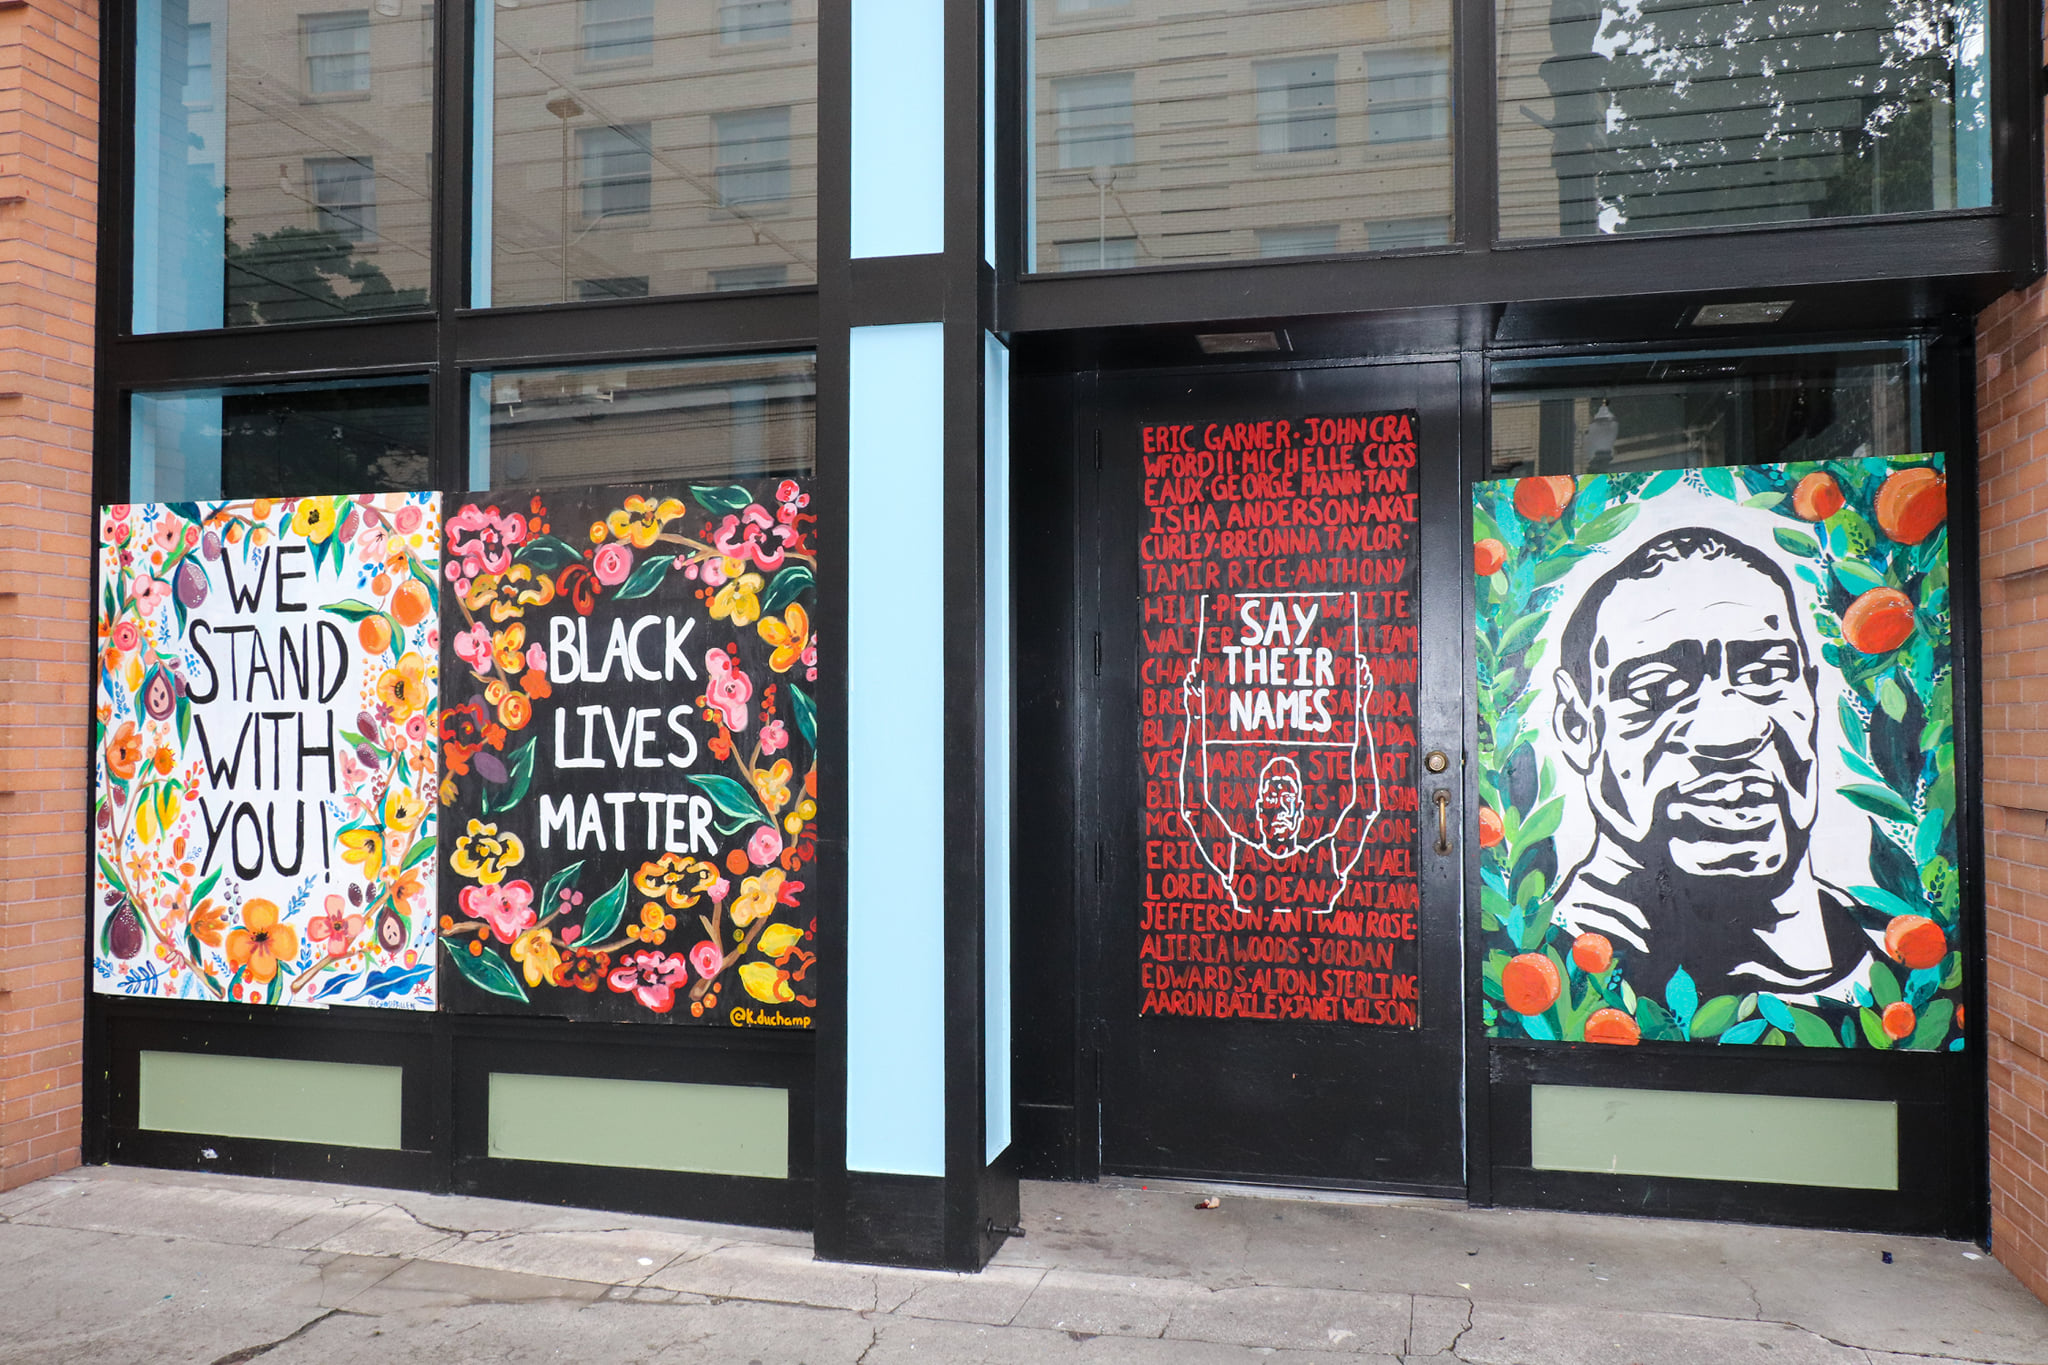 Black Lives Matter public art in Portland, Photo by Scully Media